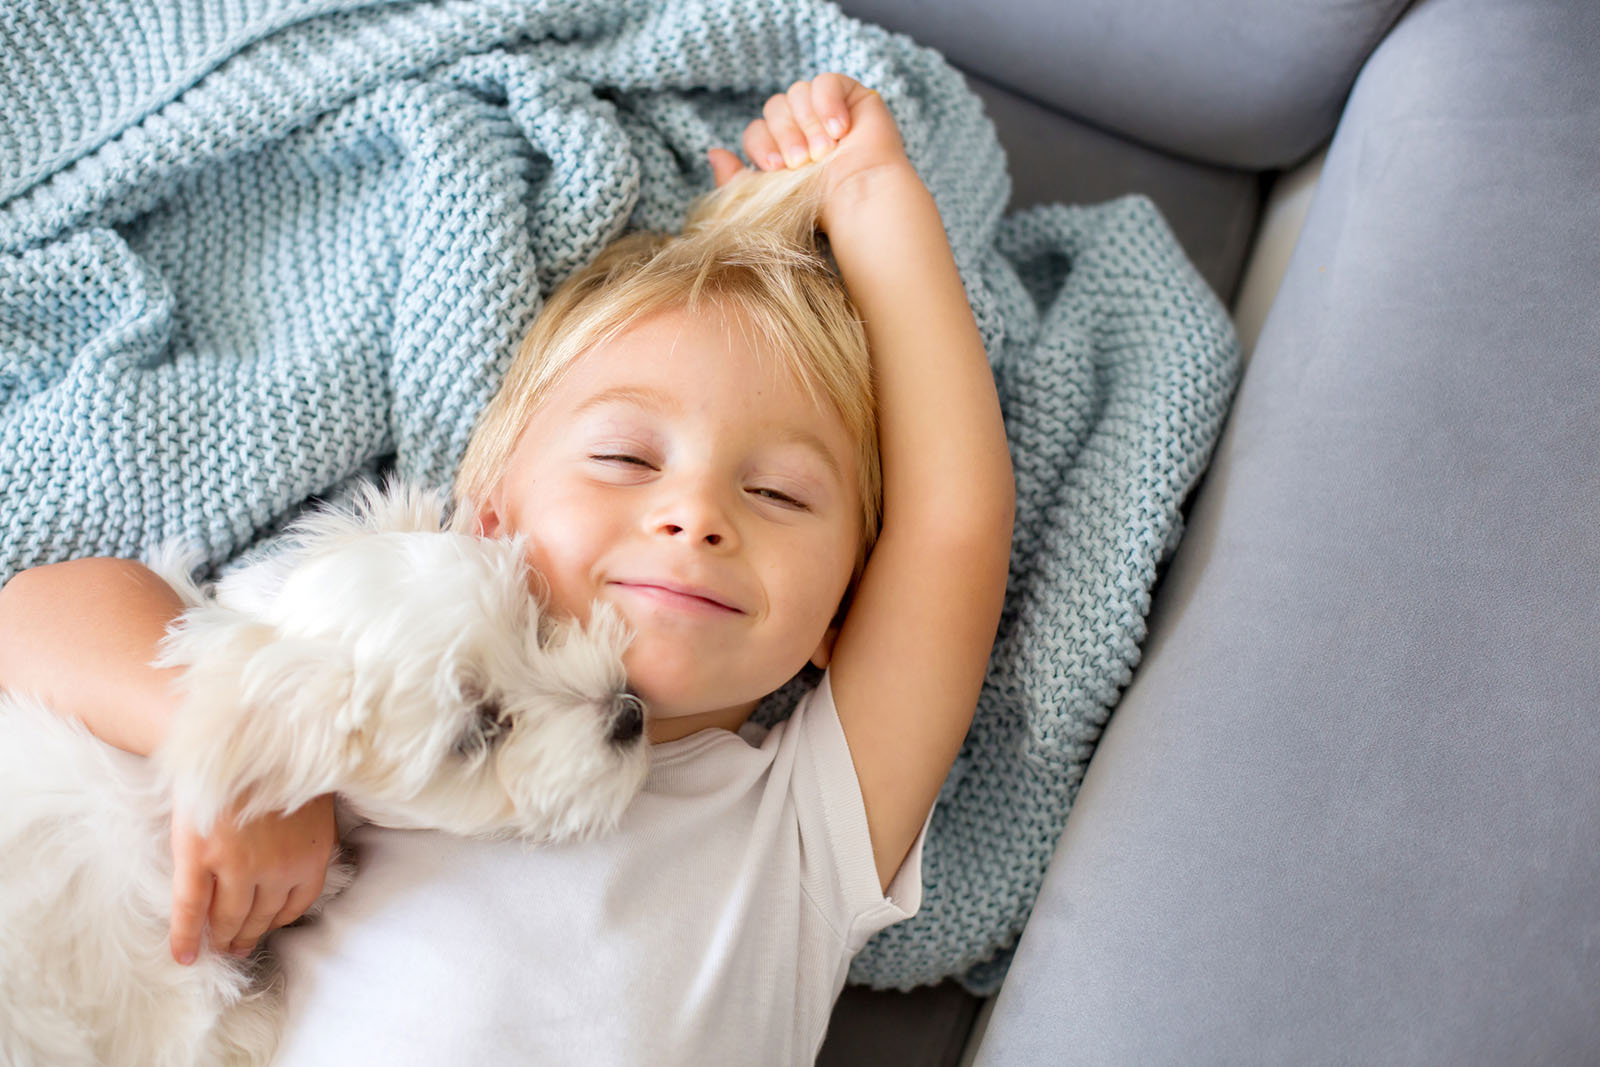 Child with dog in NYC - Nannies by Noa - New York & Tri-State Area Nanny Agency - Newborn Care - Nannying Jobs Near Me